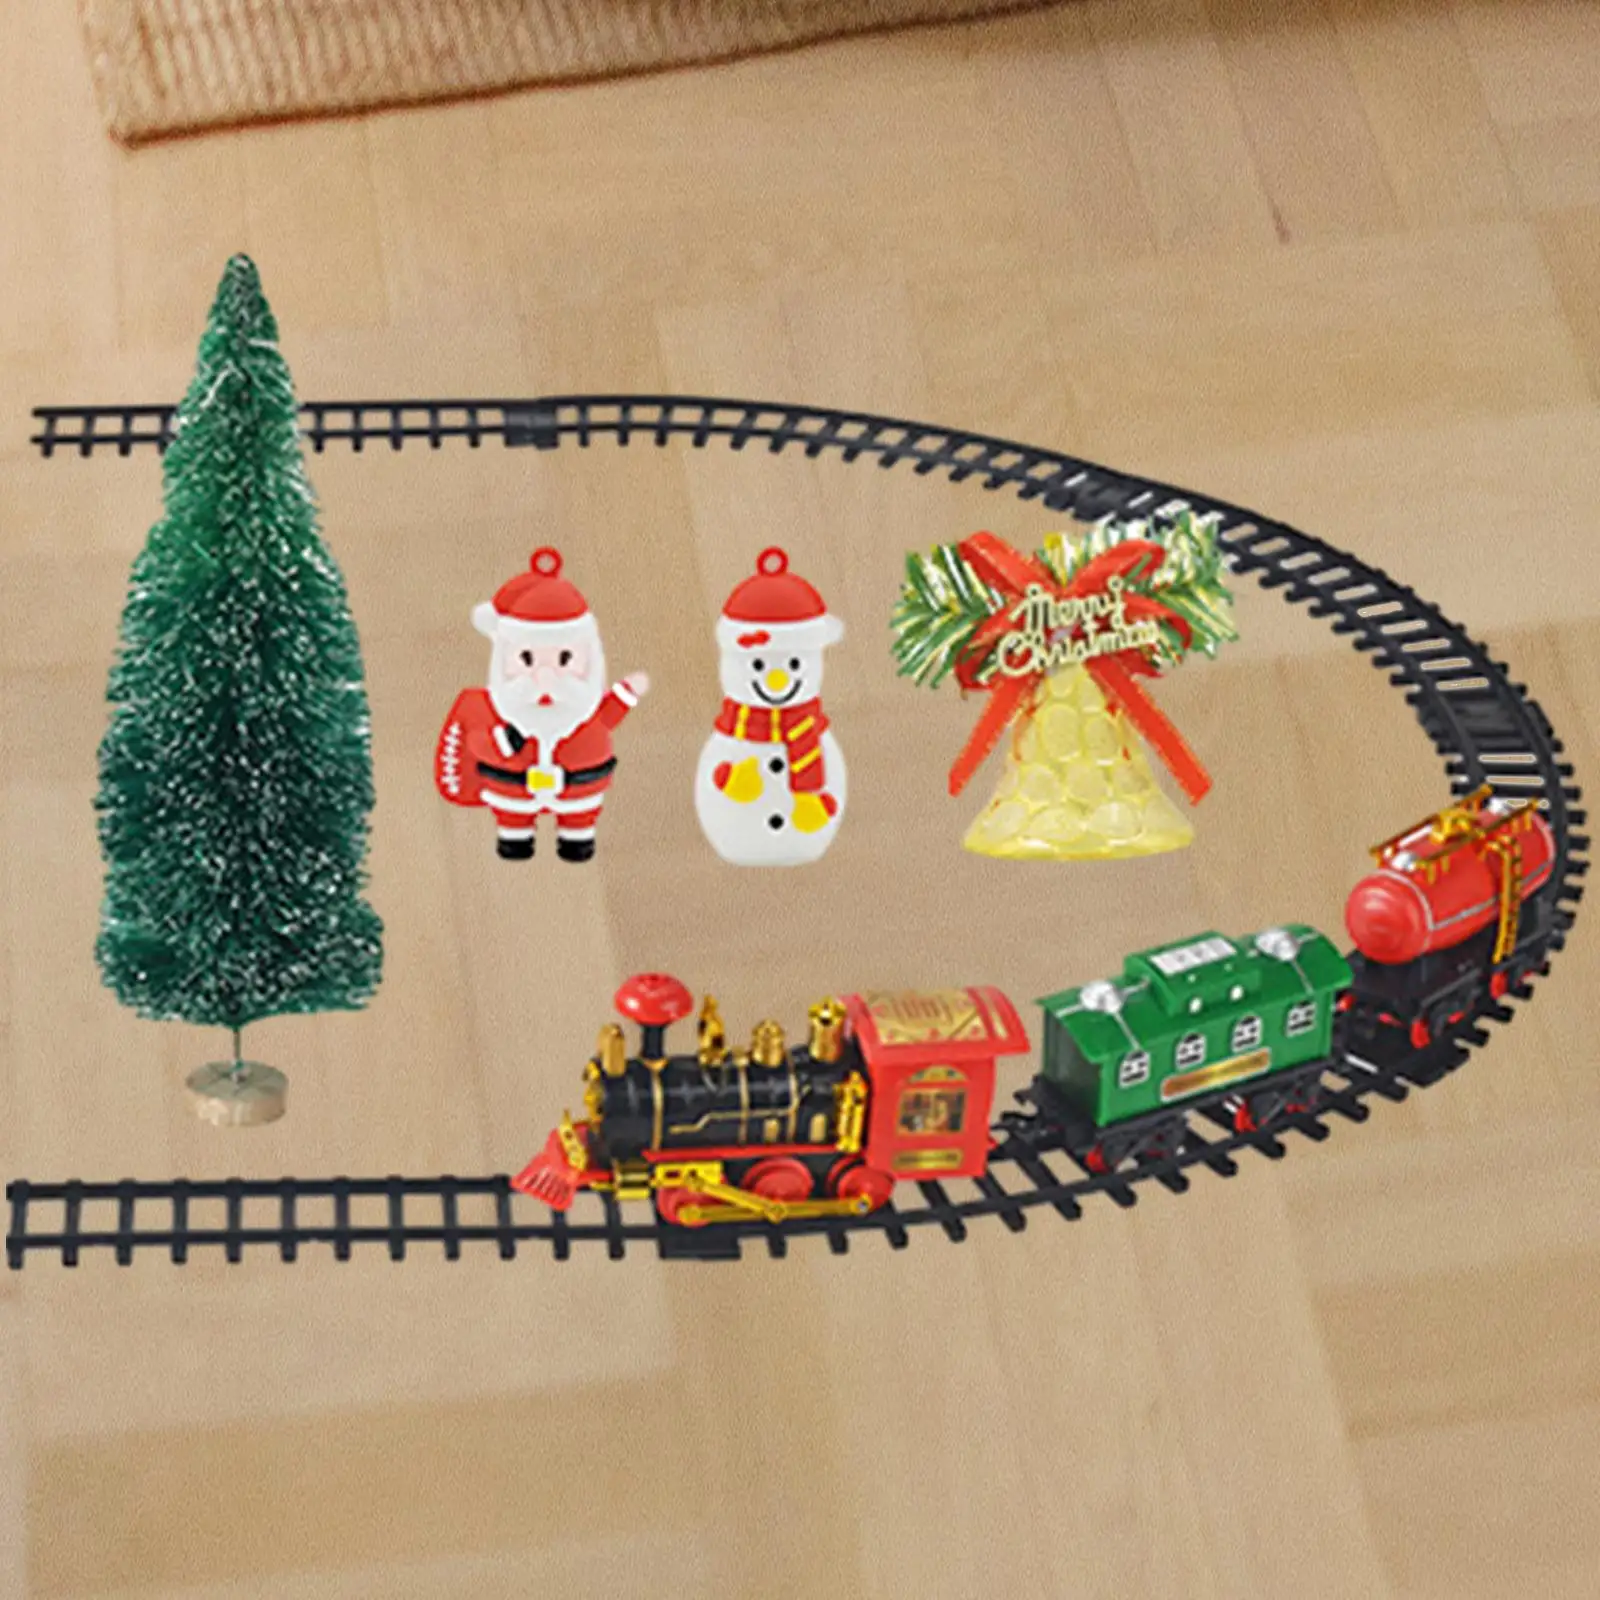 Kids Electric Train Set Christmas Train DIY Pendants Carriages Tracks Kid Train Playset Toy Railway Kit for Girls Children Gifts